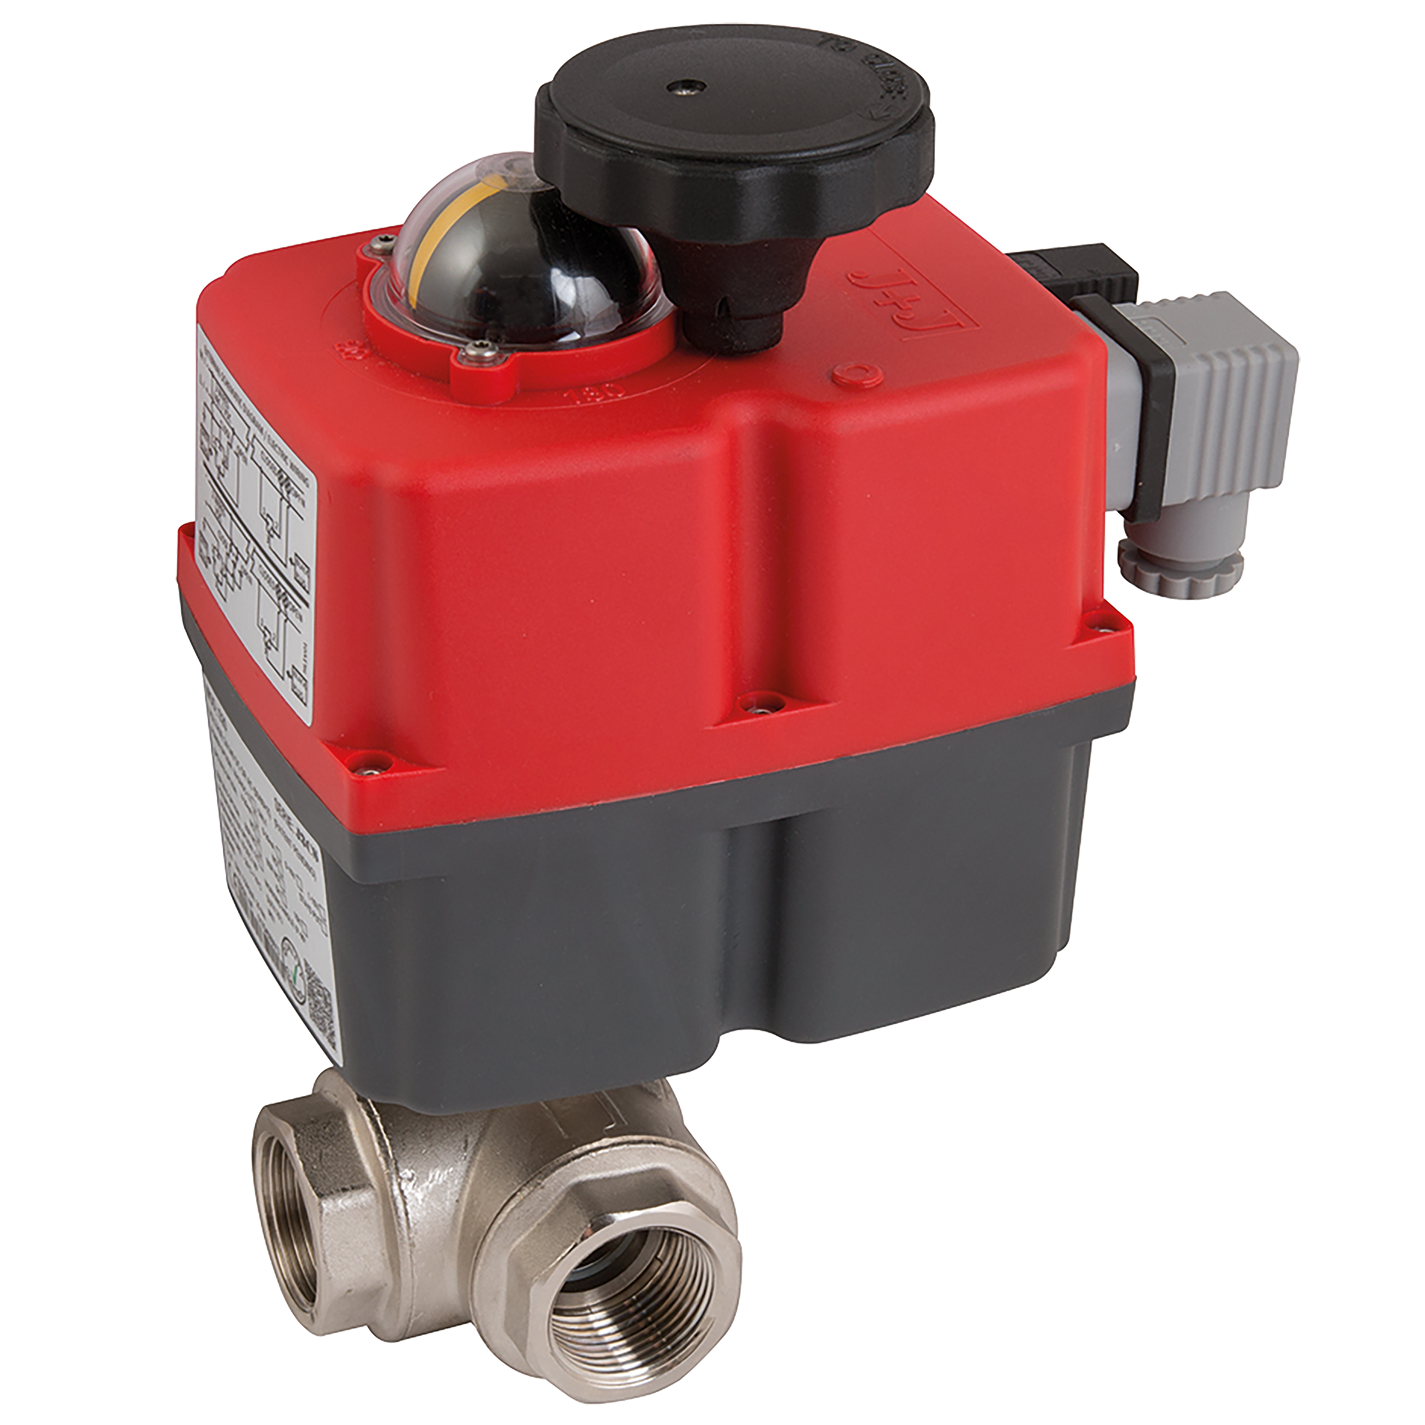 Suppliers of Electric Actuated Brass Ball Valve UK